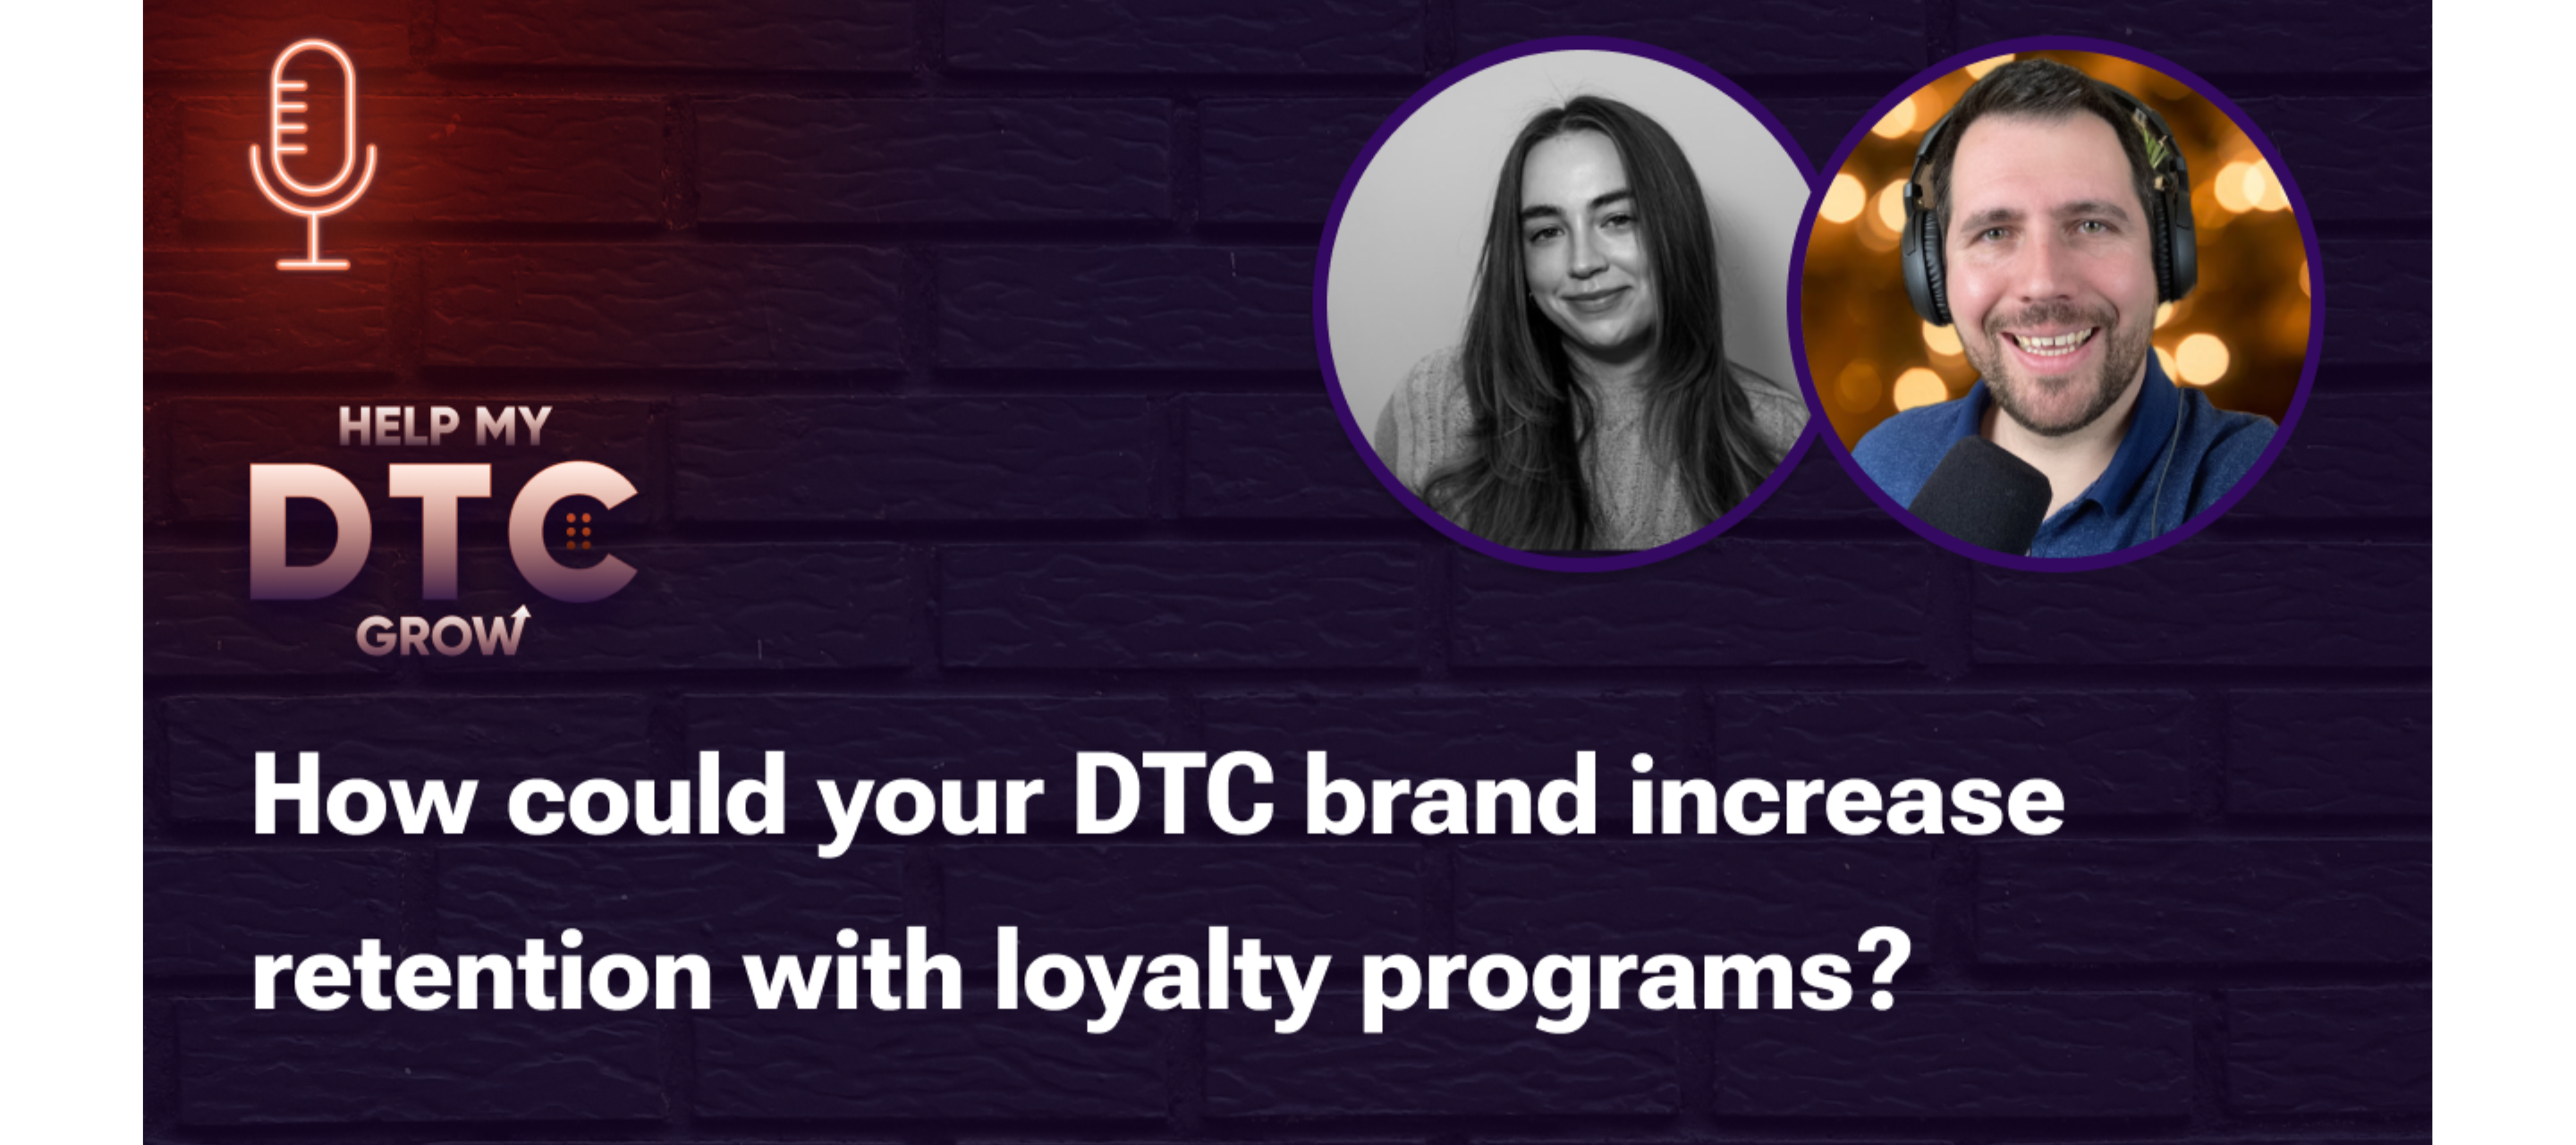 [Podcast] How could your DTC brand increase retention with loyalty programs